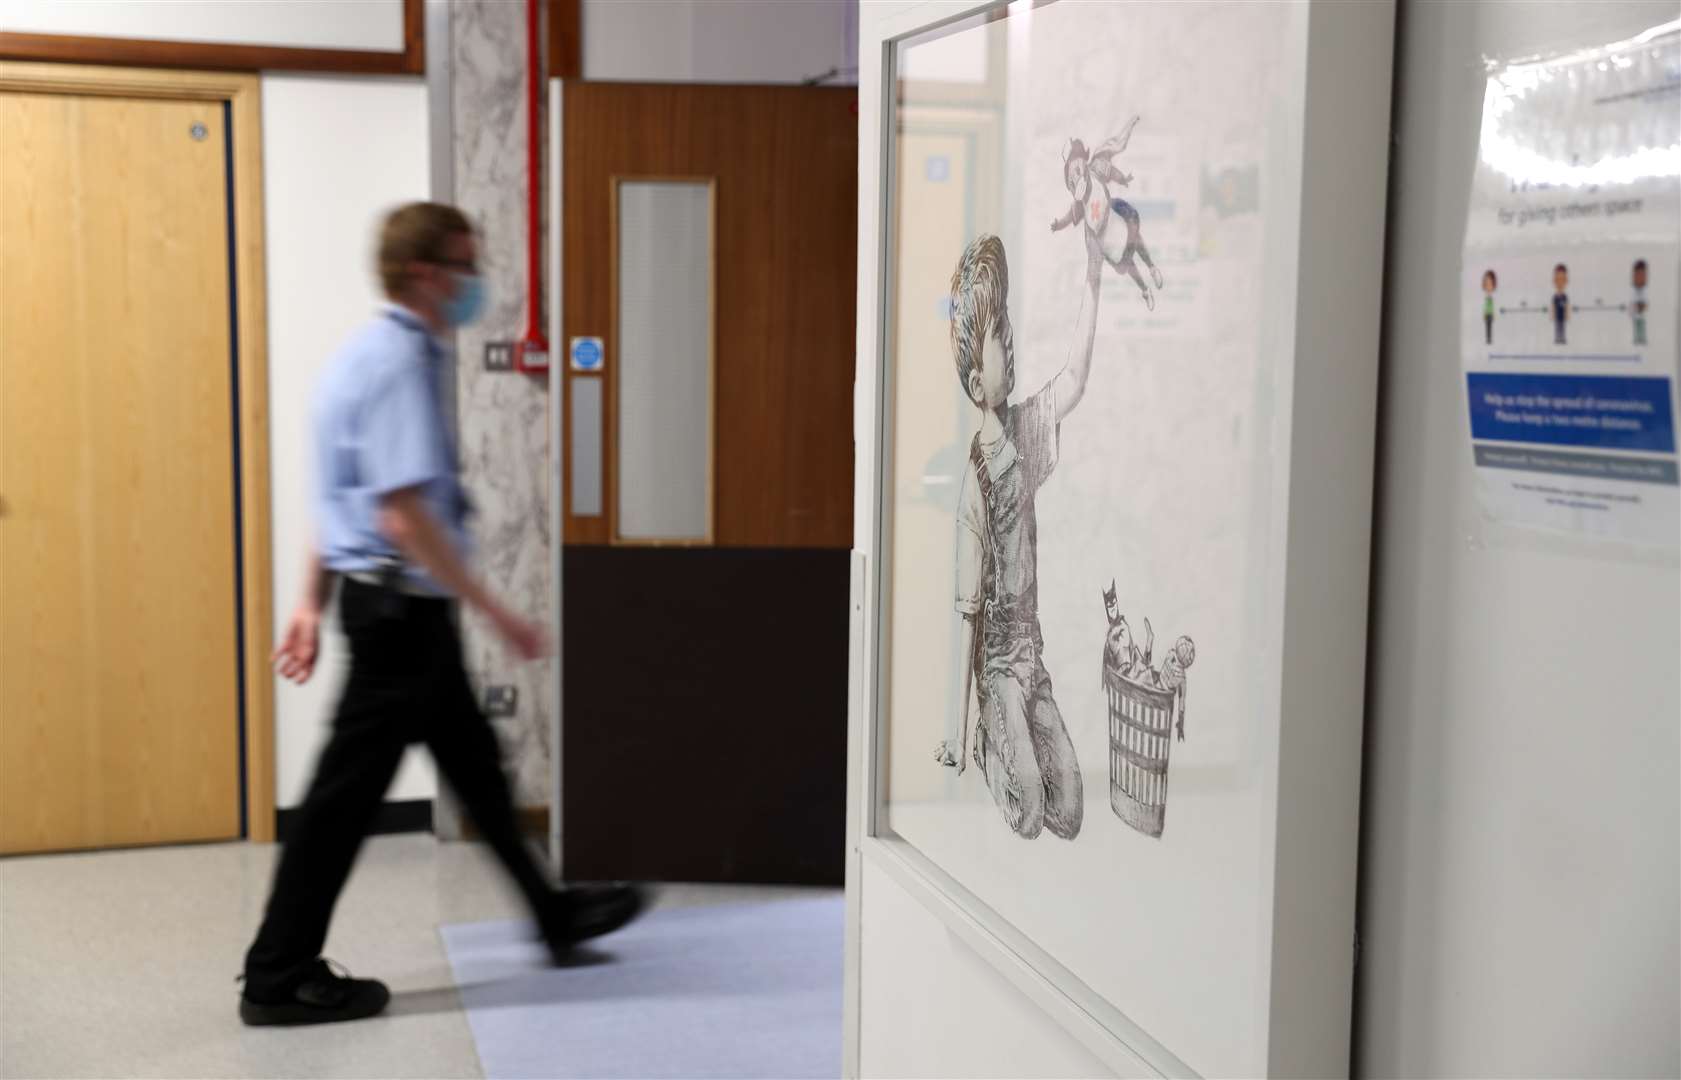 A person walks past the artwork which has gone on display in a corridor at the hospital (Andrew Matthews/PA)